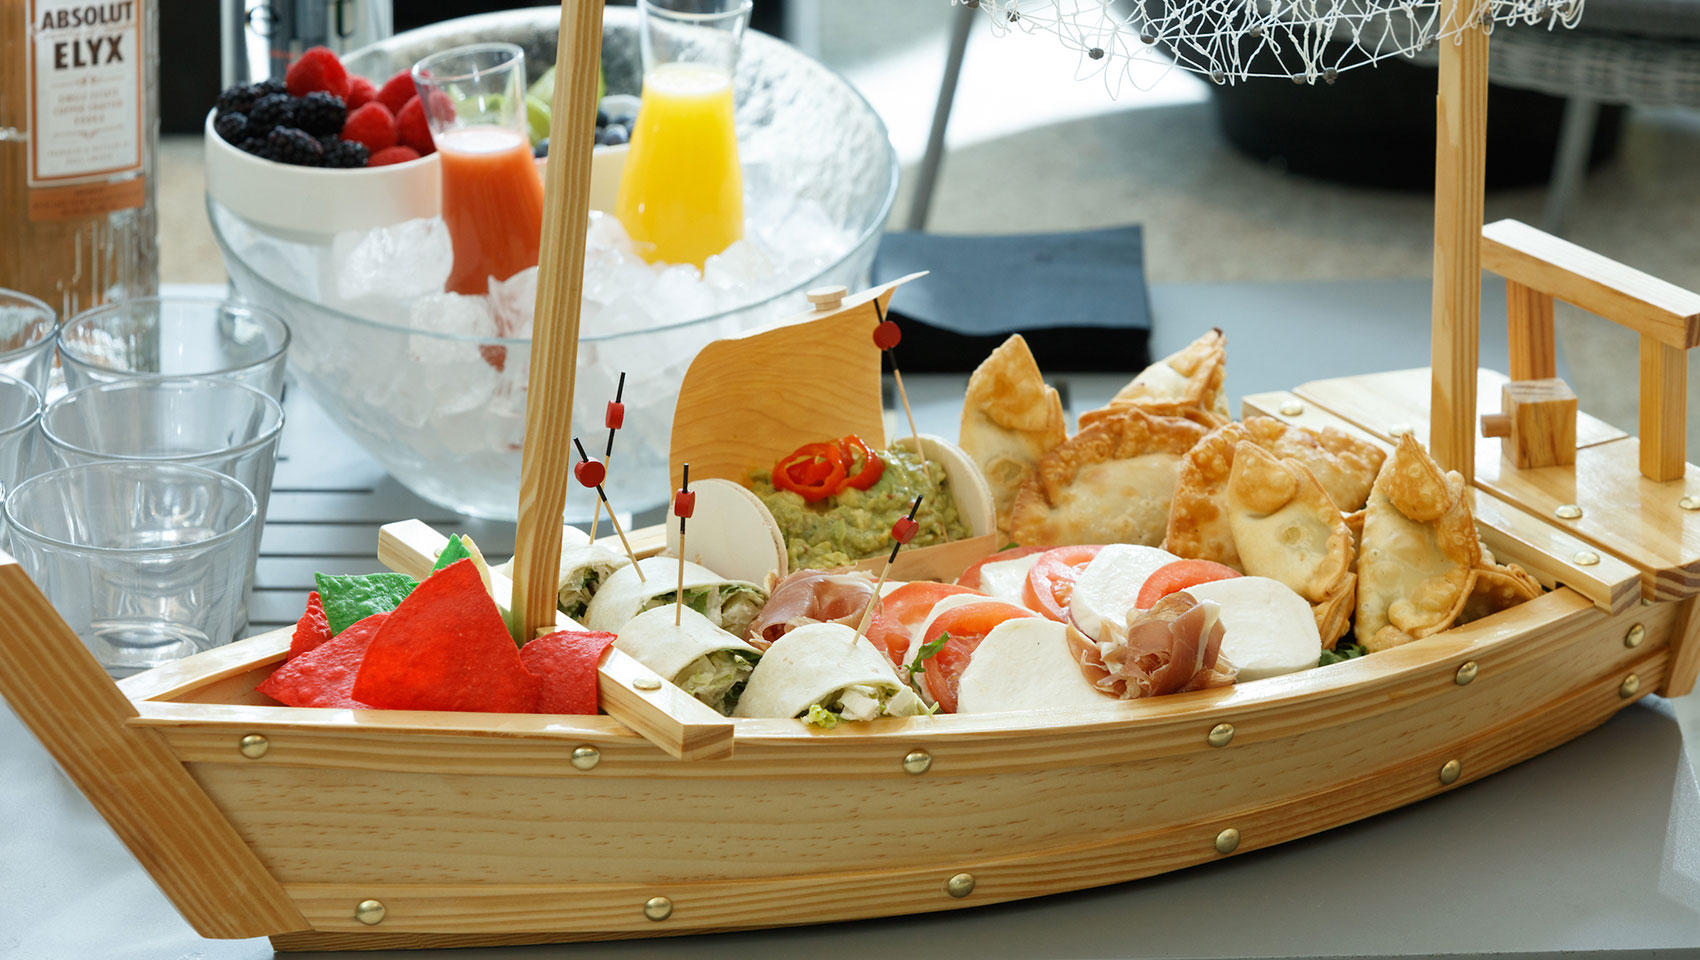 Food presented on boat